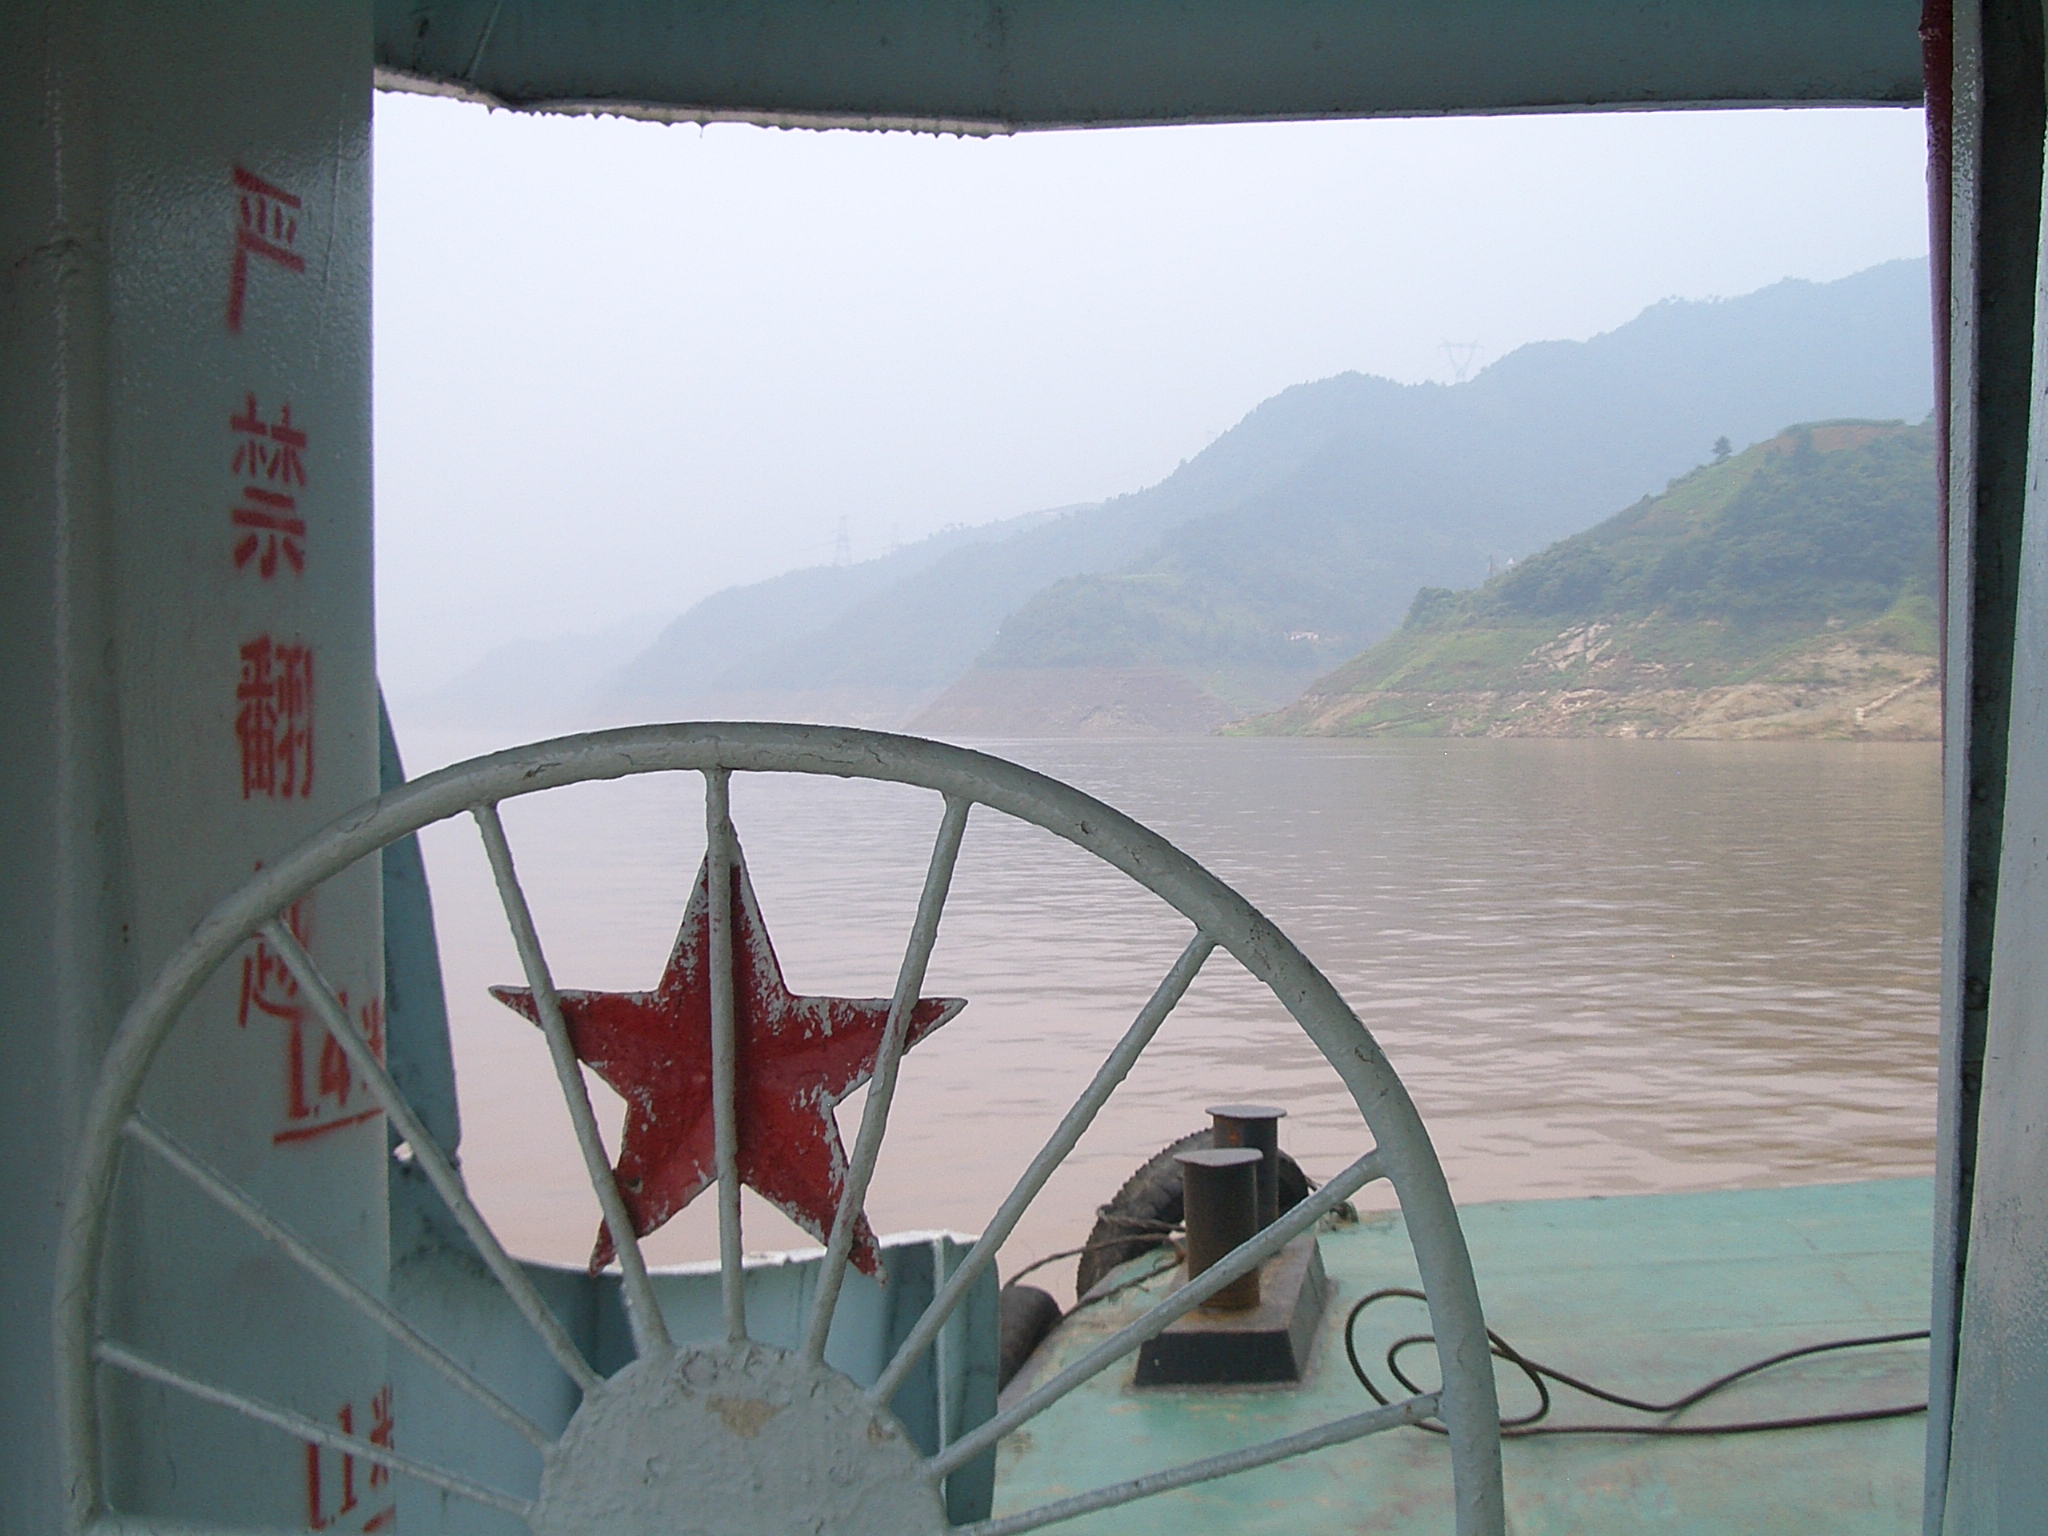 is the yangtze river the longest river in china and asia